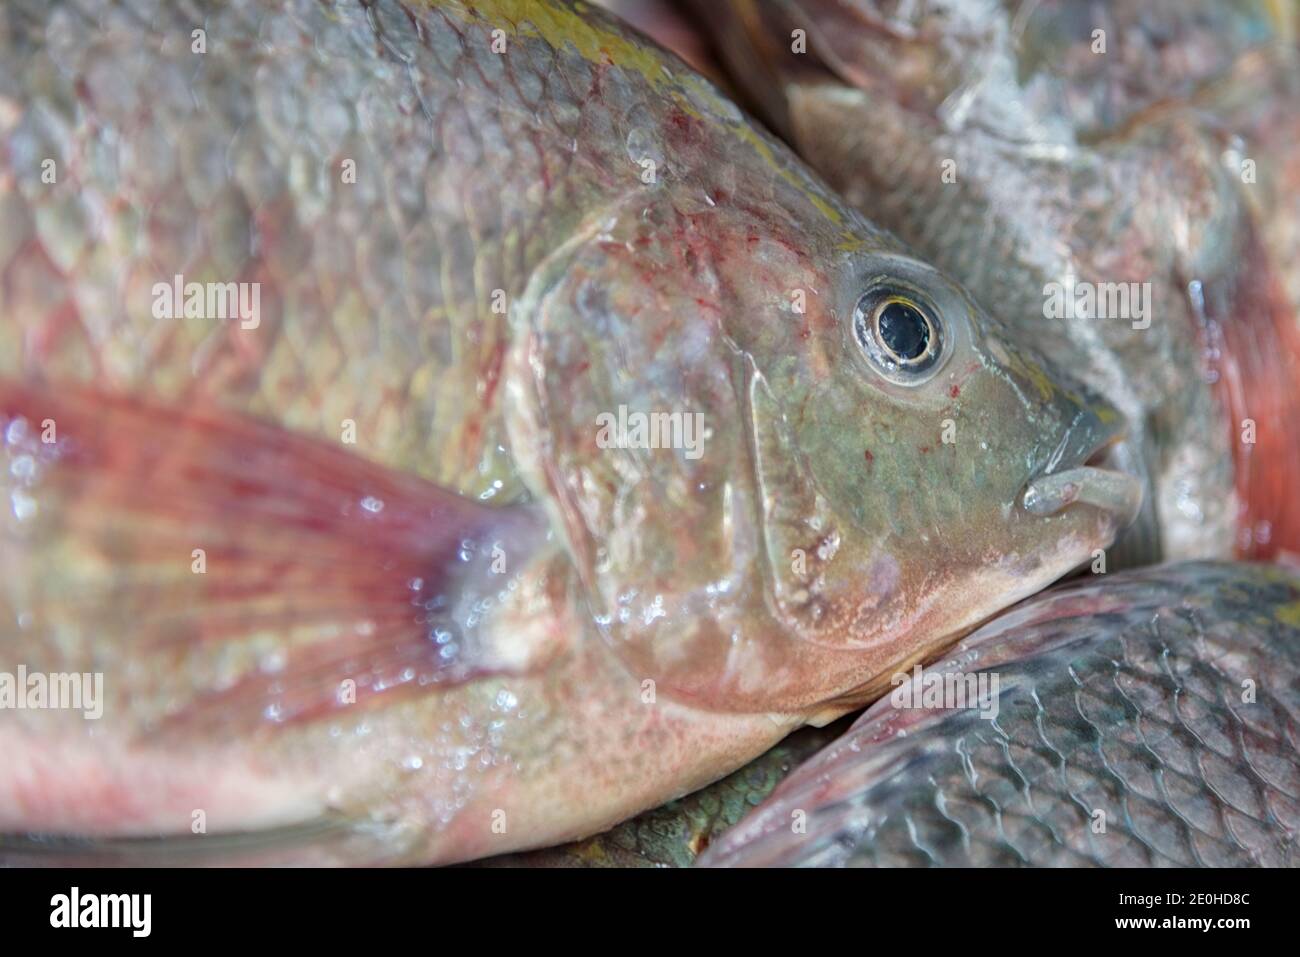 Tilapia is freshwater fish inhabiting shallow streams, ponds, rivers and lakes. Head of fresh Tilapia on ice. Seafood market in Israel. Closeup. Backg Stock Photo